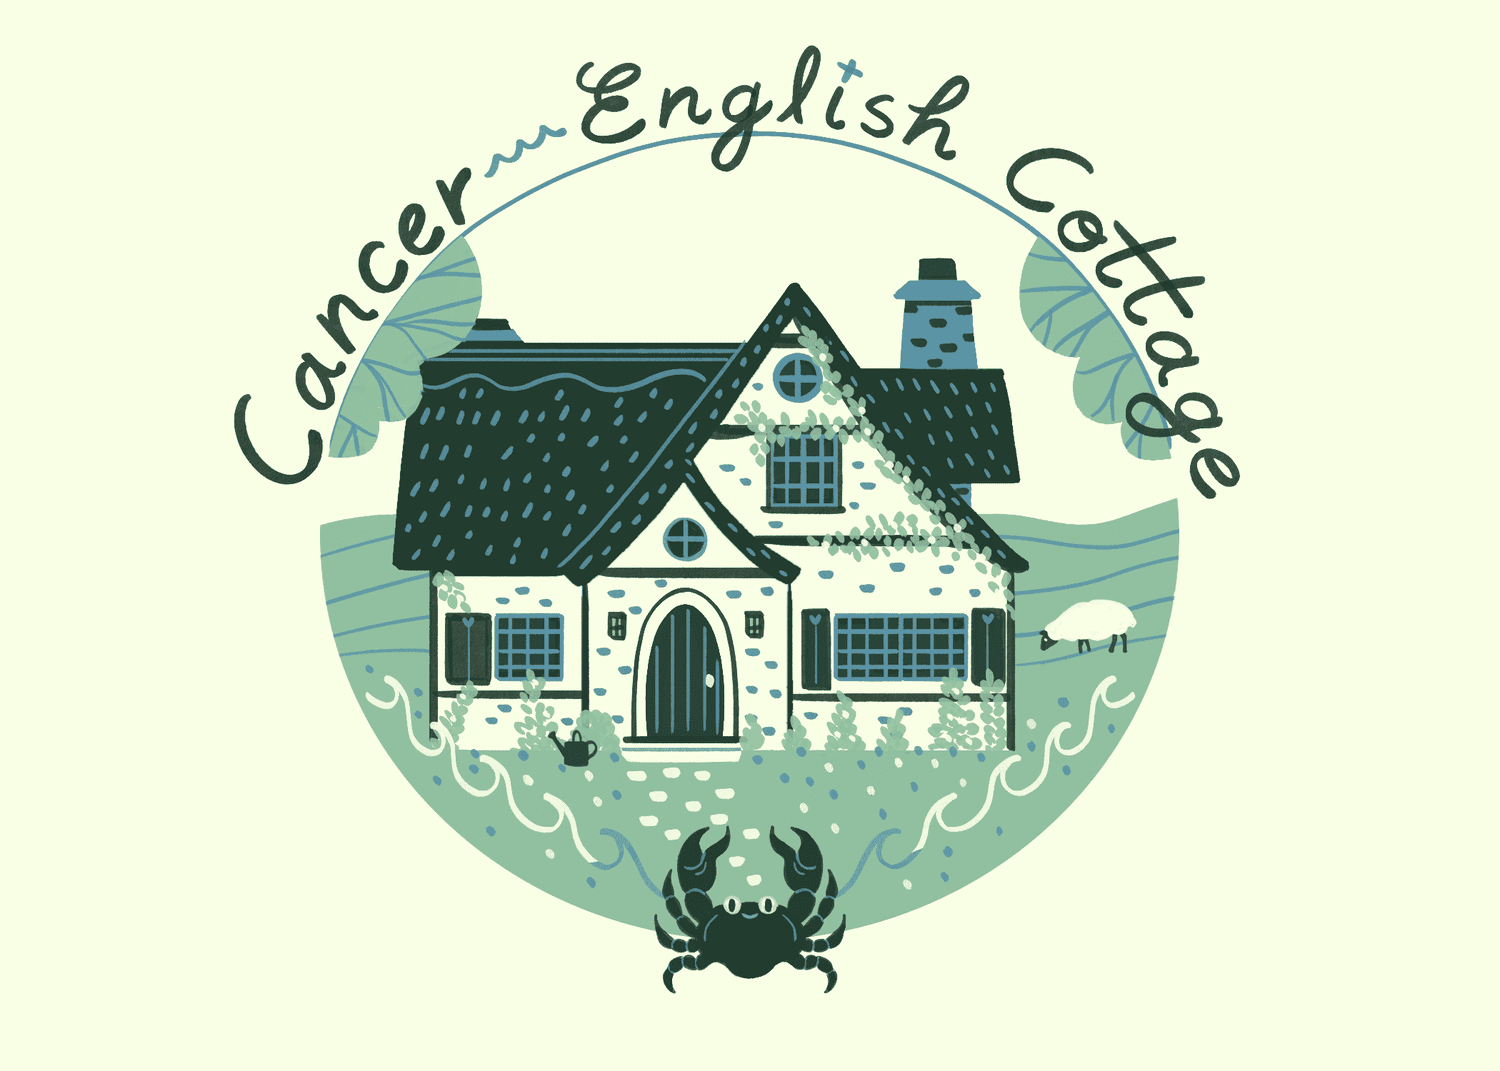 An illustration of an English cottage for a cancer